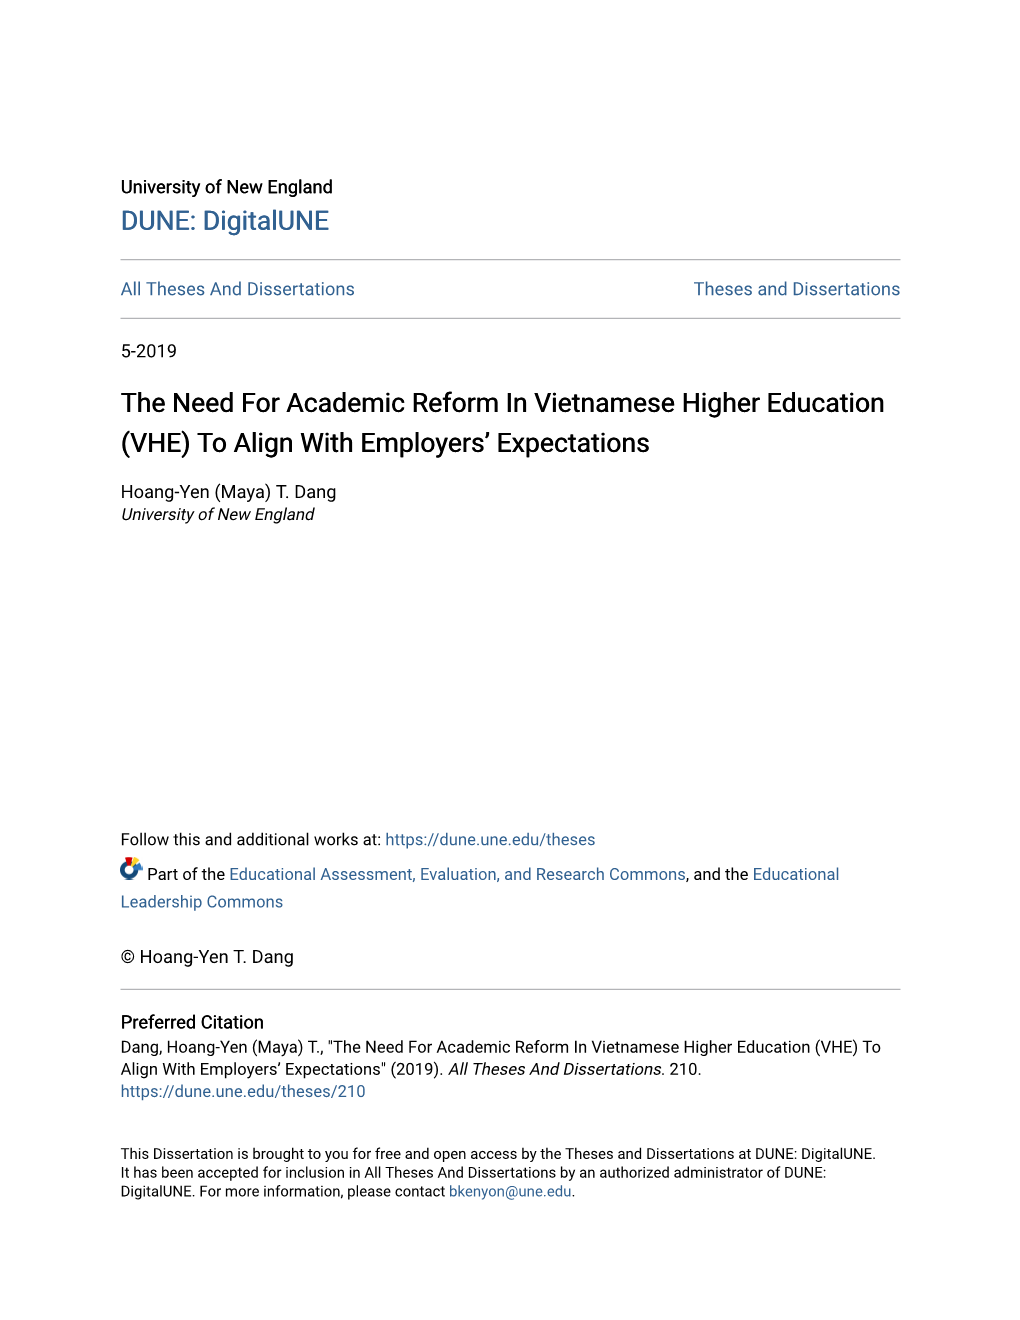 The Need for Academic Reform in Vietnamese Higher Education (VHE) to Align with Employers’ Expectations